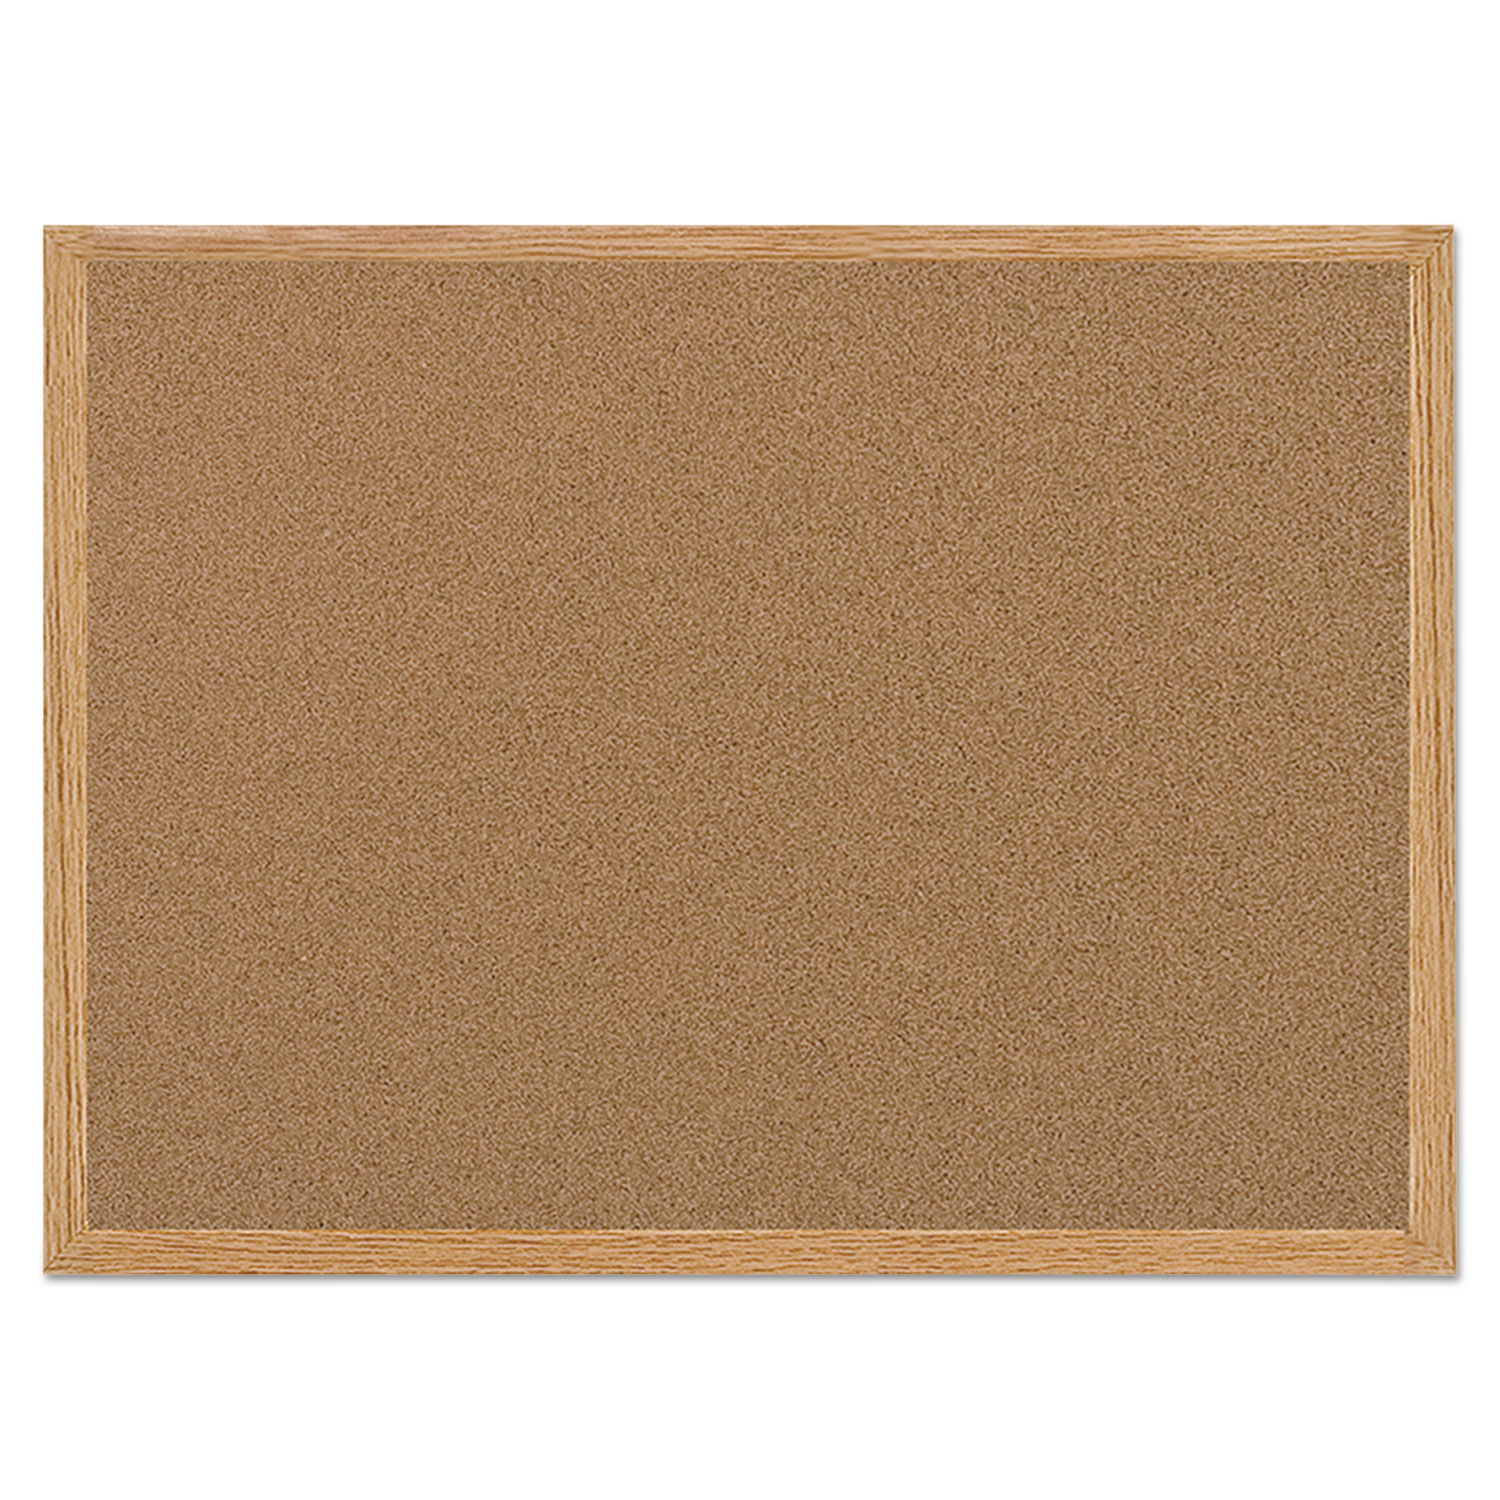  MasterVision SF152001239 Value Cork Bulletin Board with Oak Frame, 36 x 48, Natural (BVCSF152001239) 